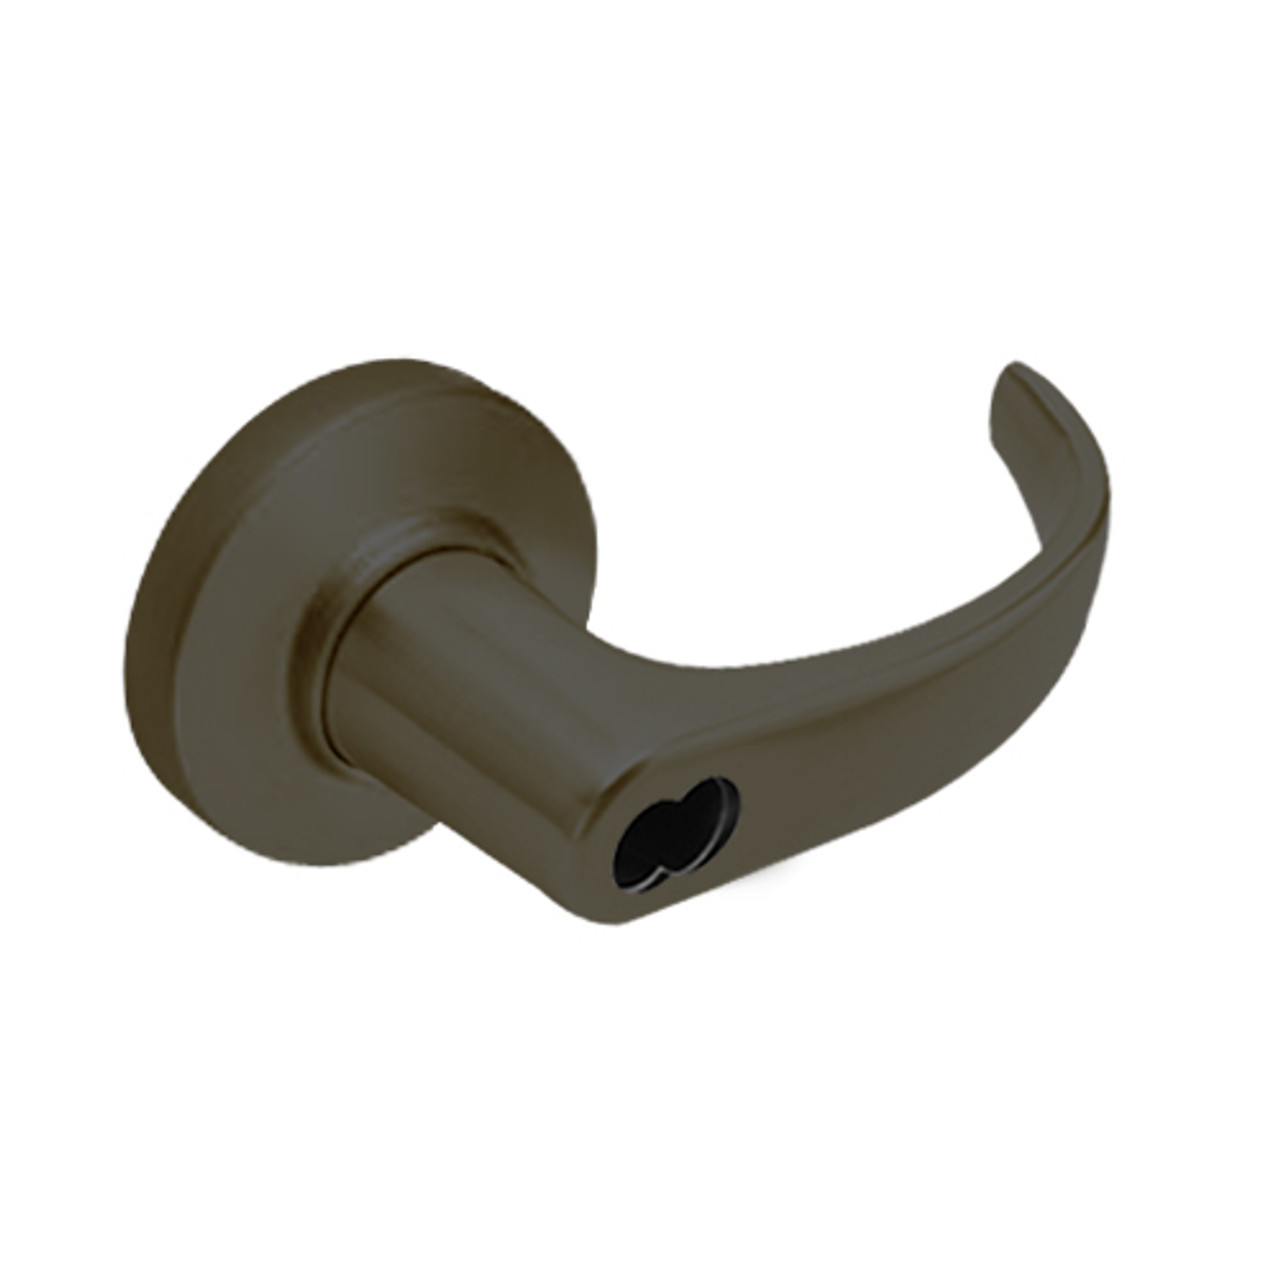 9K37DR14CSTK613 Best 9K Series Special Function Cylindrical Lever Locks with Curved with Return Lever Design Accept 7 Pin Best Core in Oil Rubbed Bronze